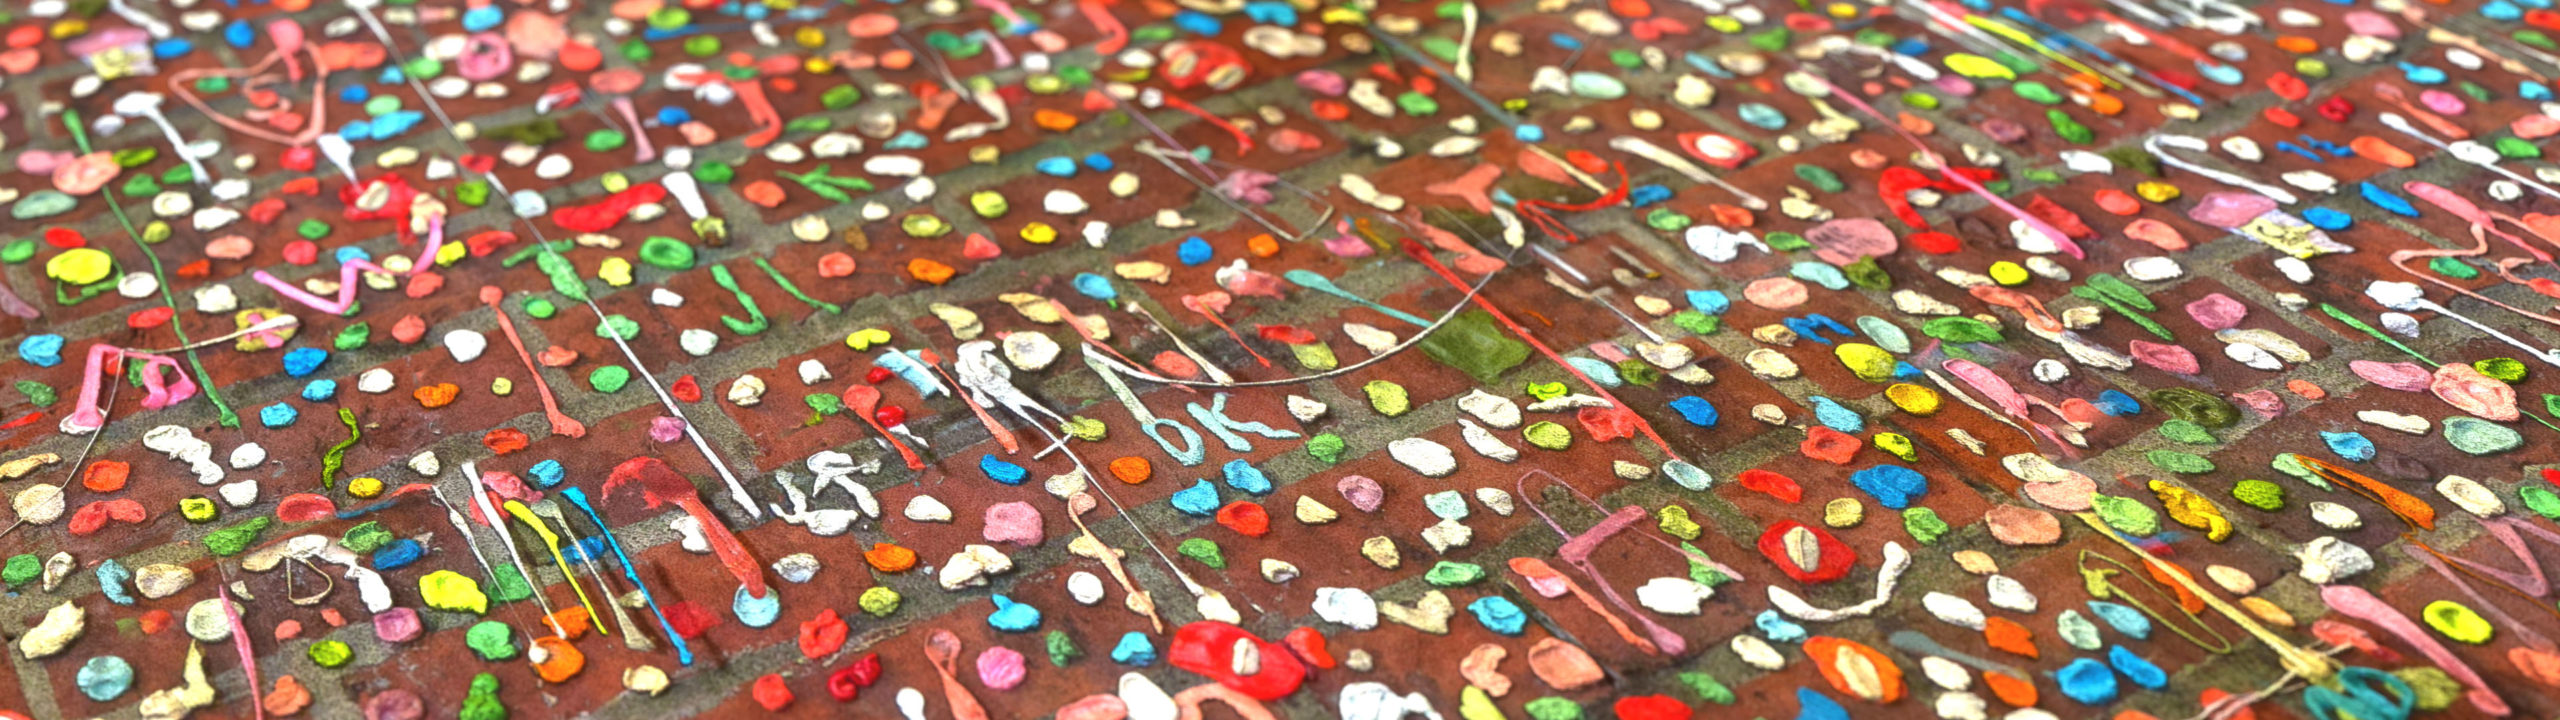 gum wall preview render